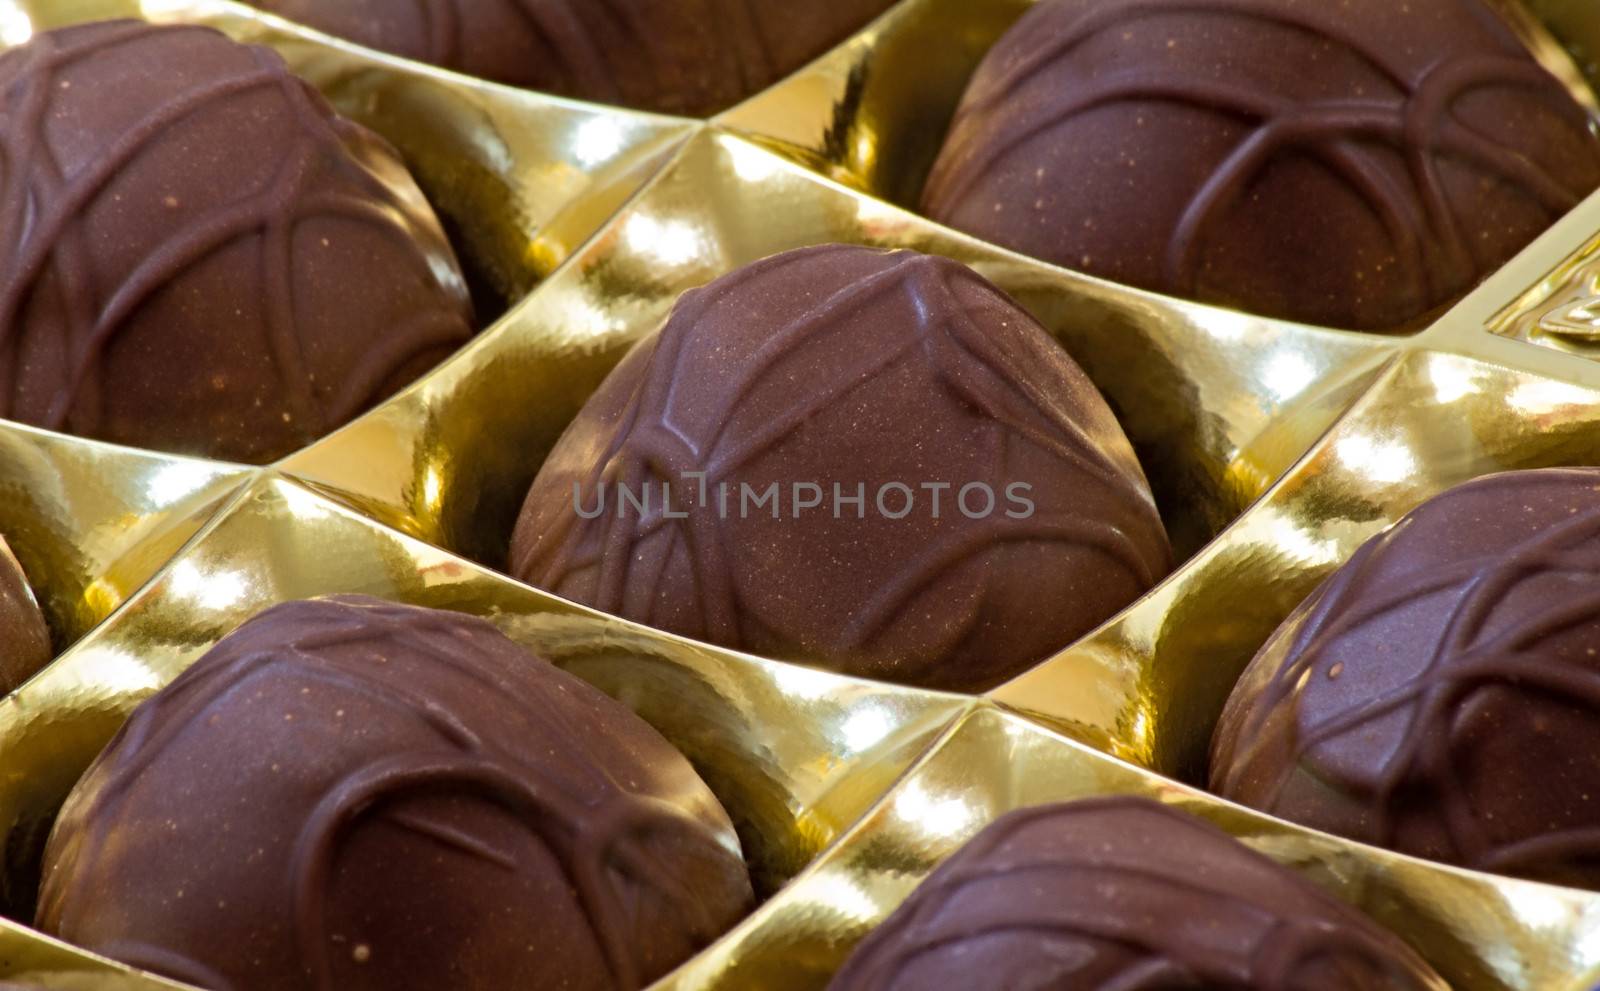 Fragment of the packaging with large beautiful chocolates. Photographed close up.
